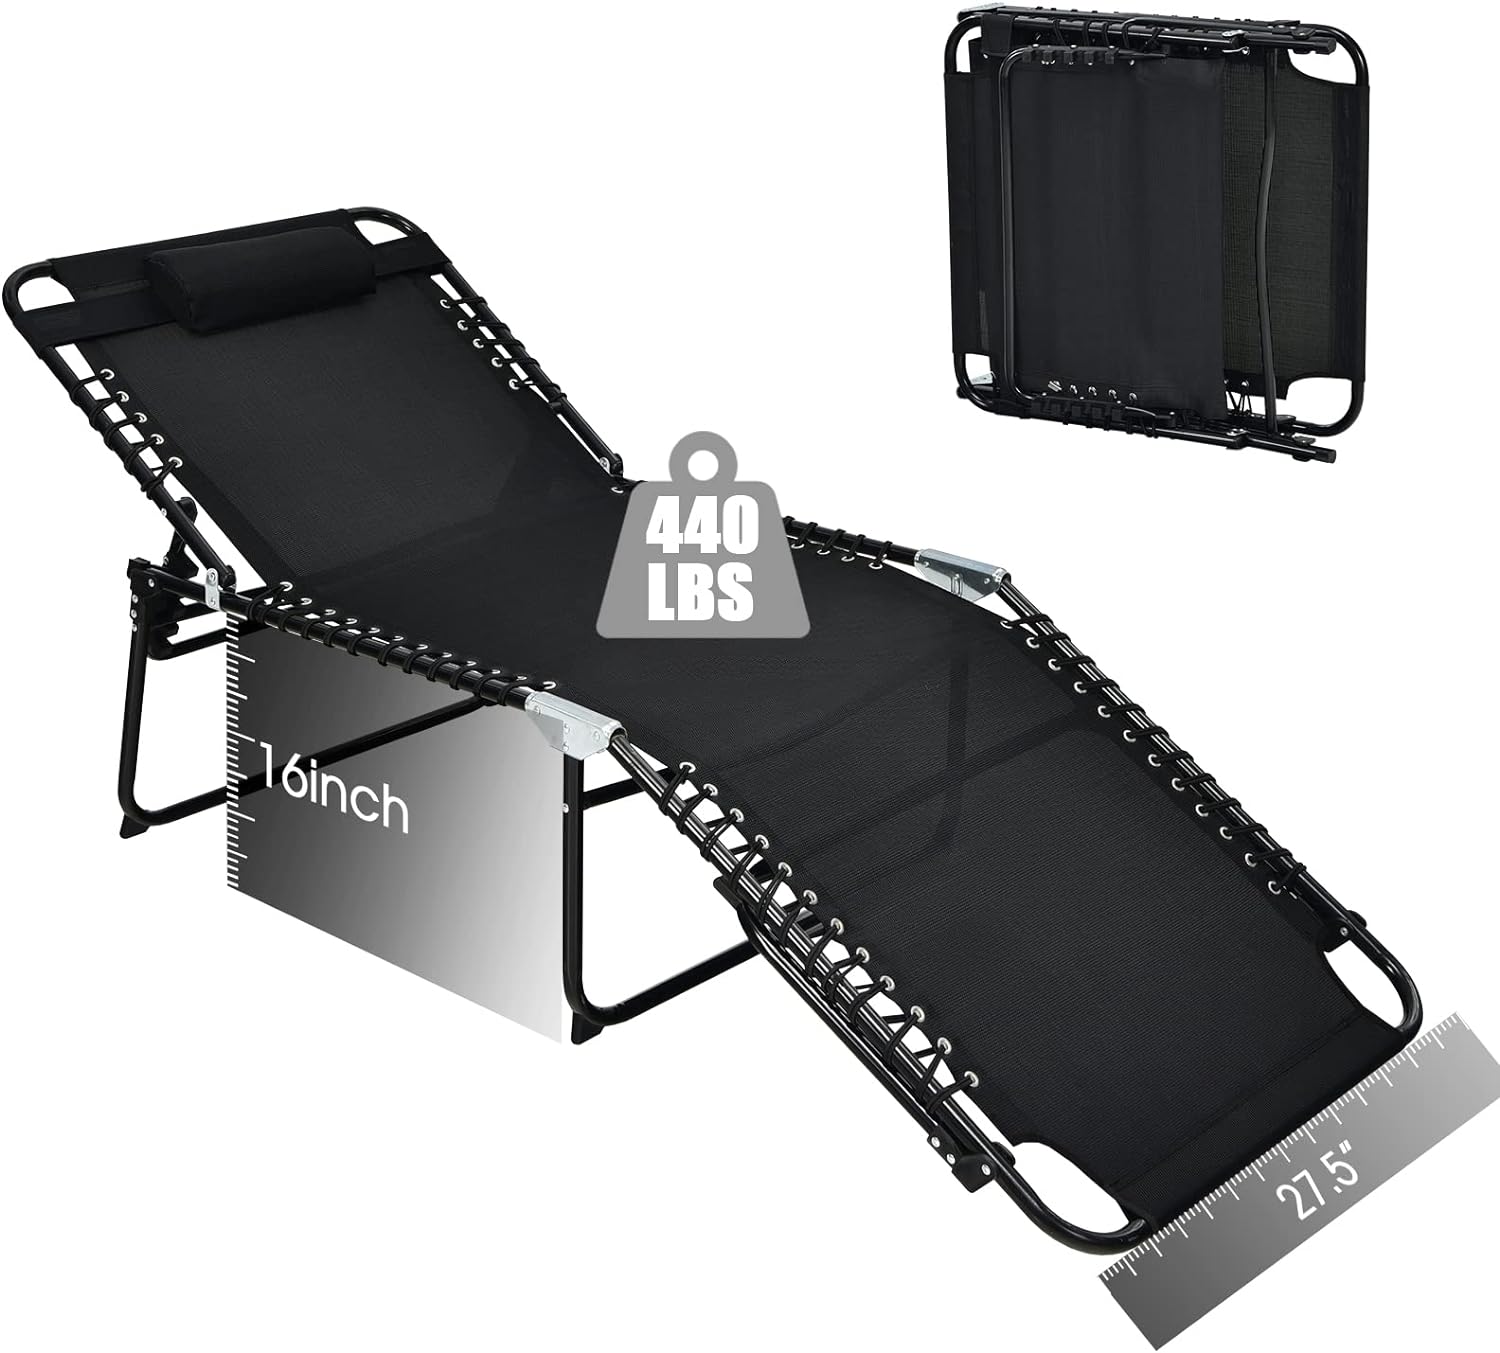 Bought the Grey Xtra wide 16 high lounger. I'm 5'10, 165 lbs. The lounger arrived well packaged and in a clear plastic bag. The lounger opened easily, on its side and each end leg snapped into place. The center support fluctuates until weight is put on the seat. For best result sit in the center of the seat section that is closest to the back. Watch for the center support bracket, as the bracket does stick up a little, but is finished and not sharp. Just put your beach towel down first. No pro